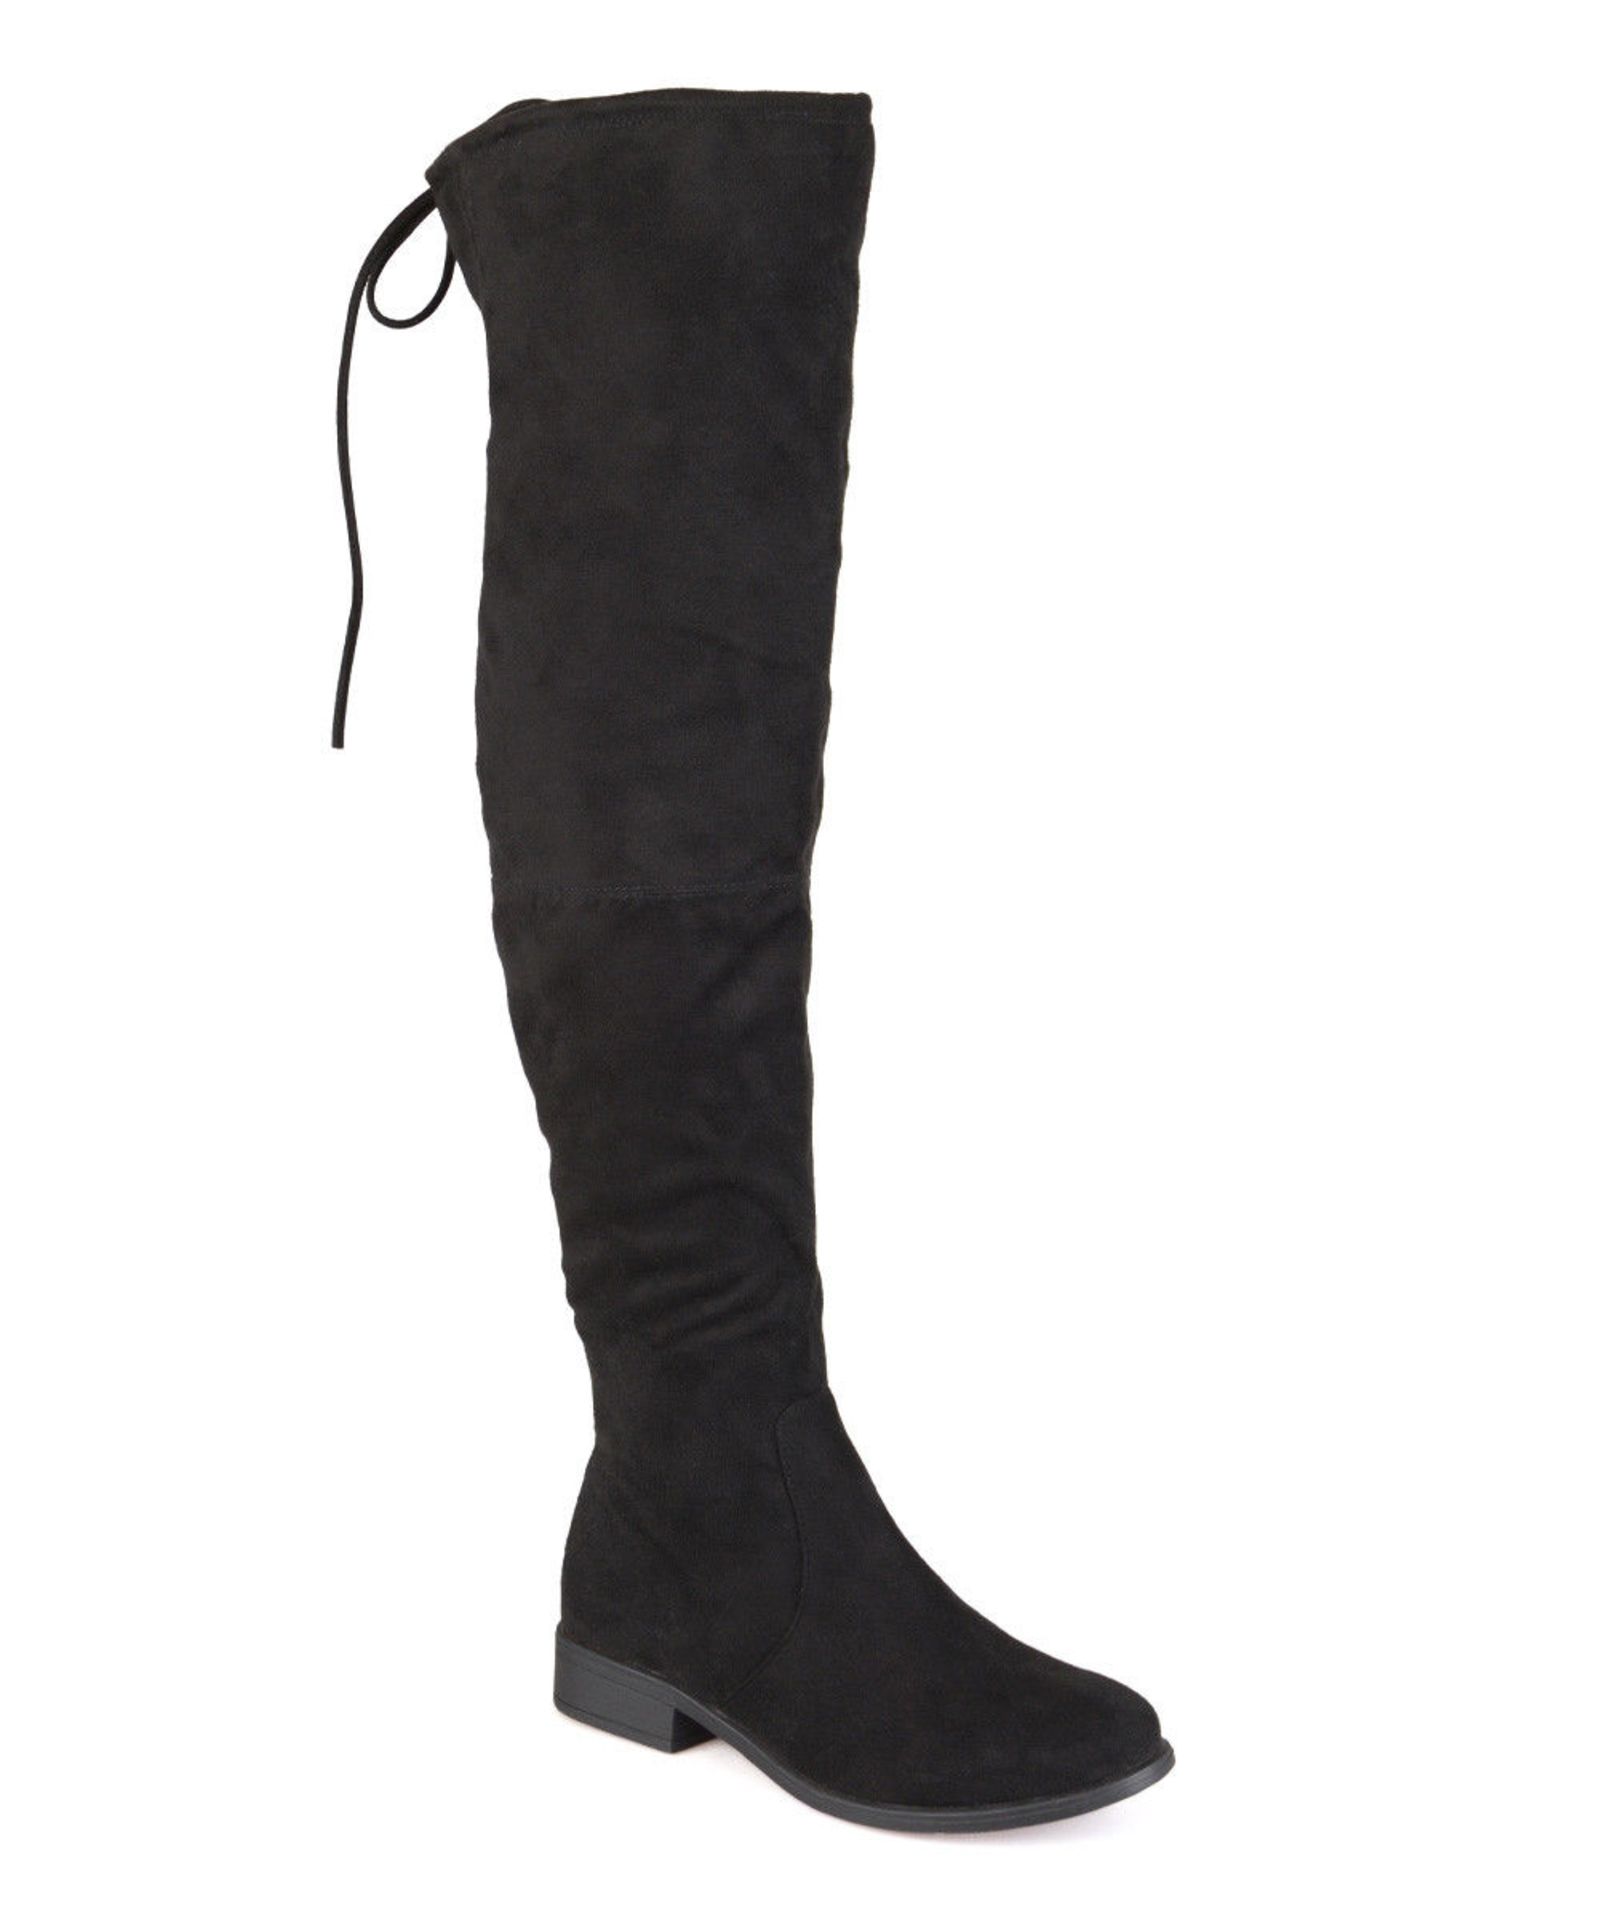 Journee Collection Black Mount Wide-Calf Over-the-Knee Boot (Uk 6:Us 8.5) (New with box) [Ref: